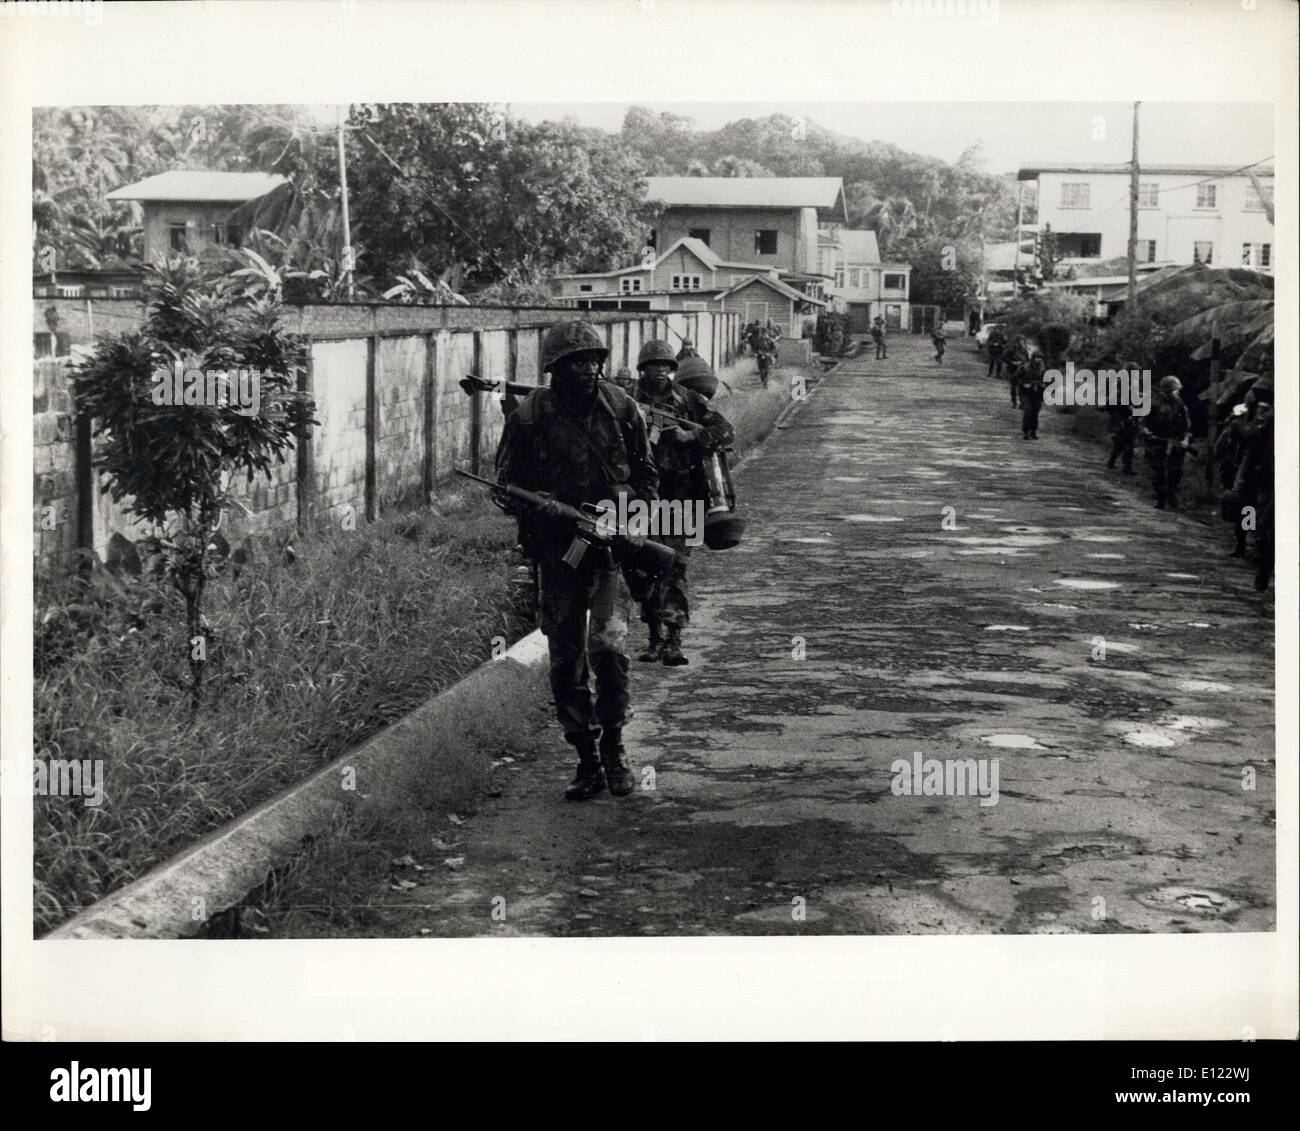 Oct. 28, 1983 - US Marines moving out of landing zone and occupying the town of Greenville. Marines cautiosly secure each street. Department of Defense photo from Consolidated News Pictures. Stock Photo